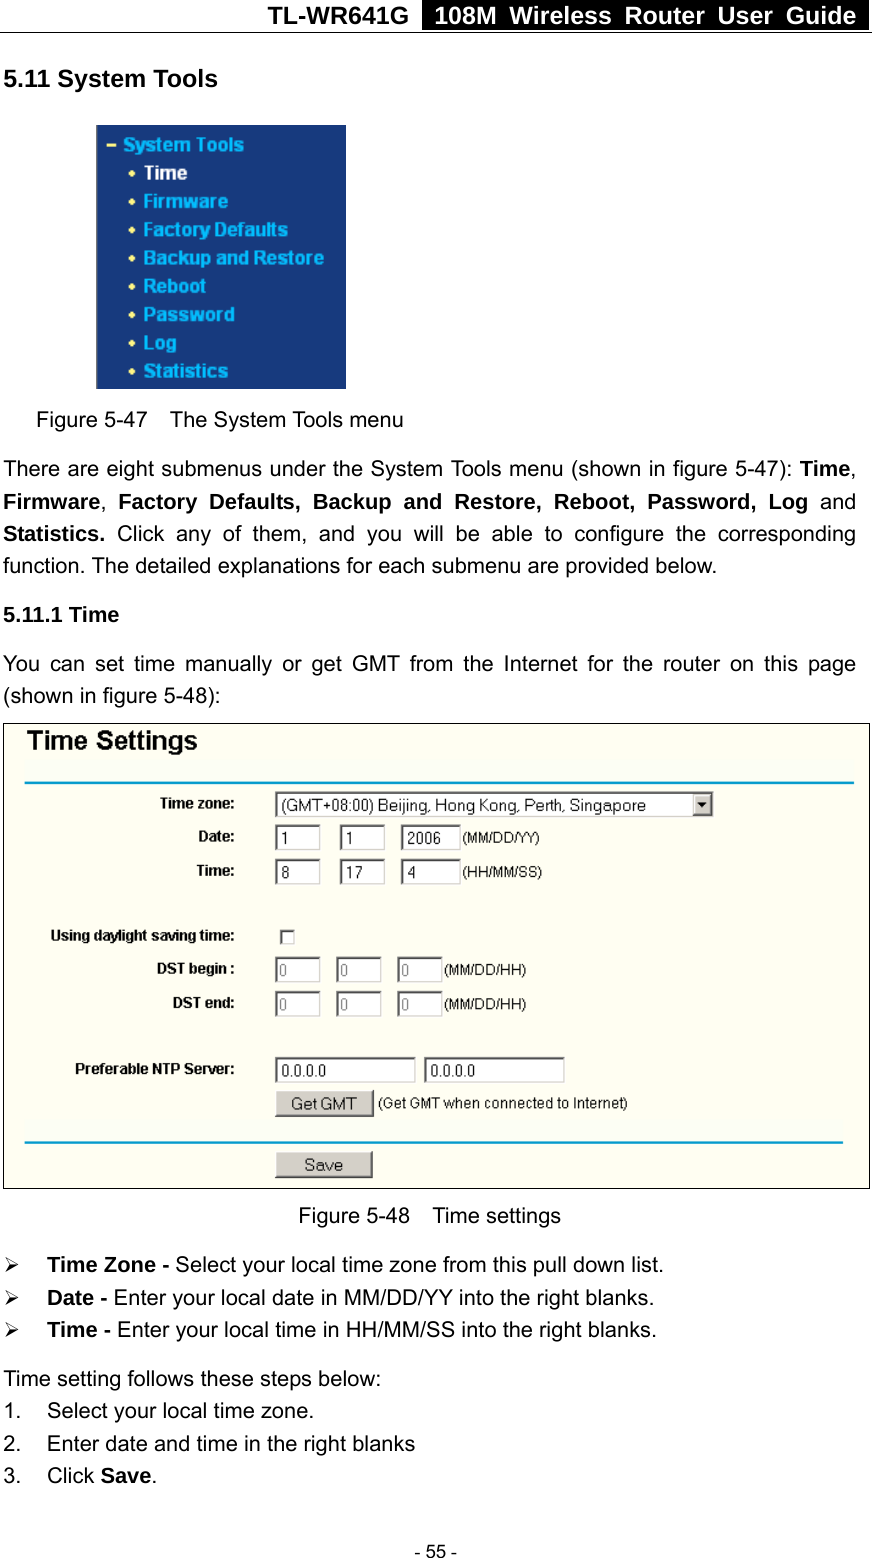 TL-WR641G   108M Wireless Router User Guide  5.11 System Tools  Figure 5-47  The System Tools menu There are eight submenus under the System Tools menu (shown in figure 5-47): Time, Firmware,  Factory Defaults, Backup and Restore, Reboot, Password, Log and Statistics.  Click any of them, and you will be able to configure the corresponding function. The detailed explanations for each submenu are provided below. 5.11.1 Time You can set time manually or get GMT from the Internet for the router on this page (shown in figure 5-48):  Figure 5-48  Time settings ¾ Time Zone - Select your local time zone from this pull down list. ¾ Date - Enter your local date in MM/DD/YY into the right blanks. ¾ Time - Enter your local time in HH/MM/SS into the right blanks. Time setting follows these steps below: 1.  Select your local time zone. 2.  Enter date and time in the right blanks 3. Click Save.  - 55 - 